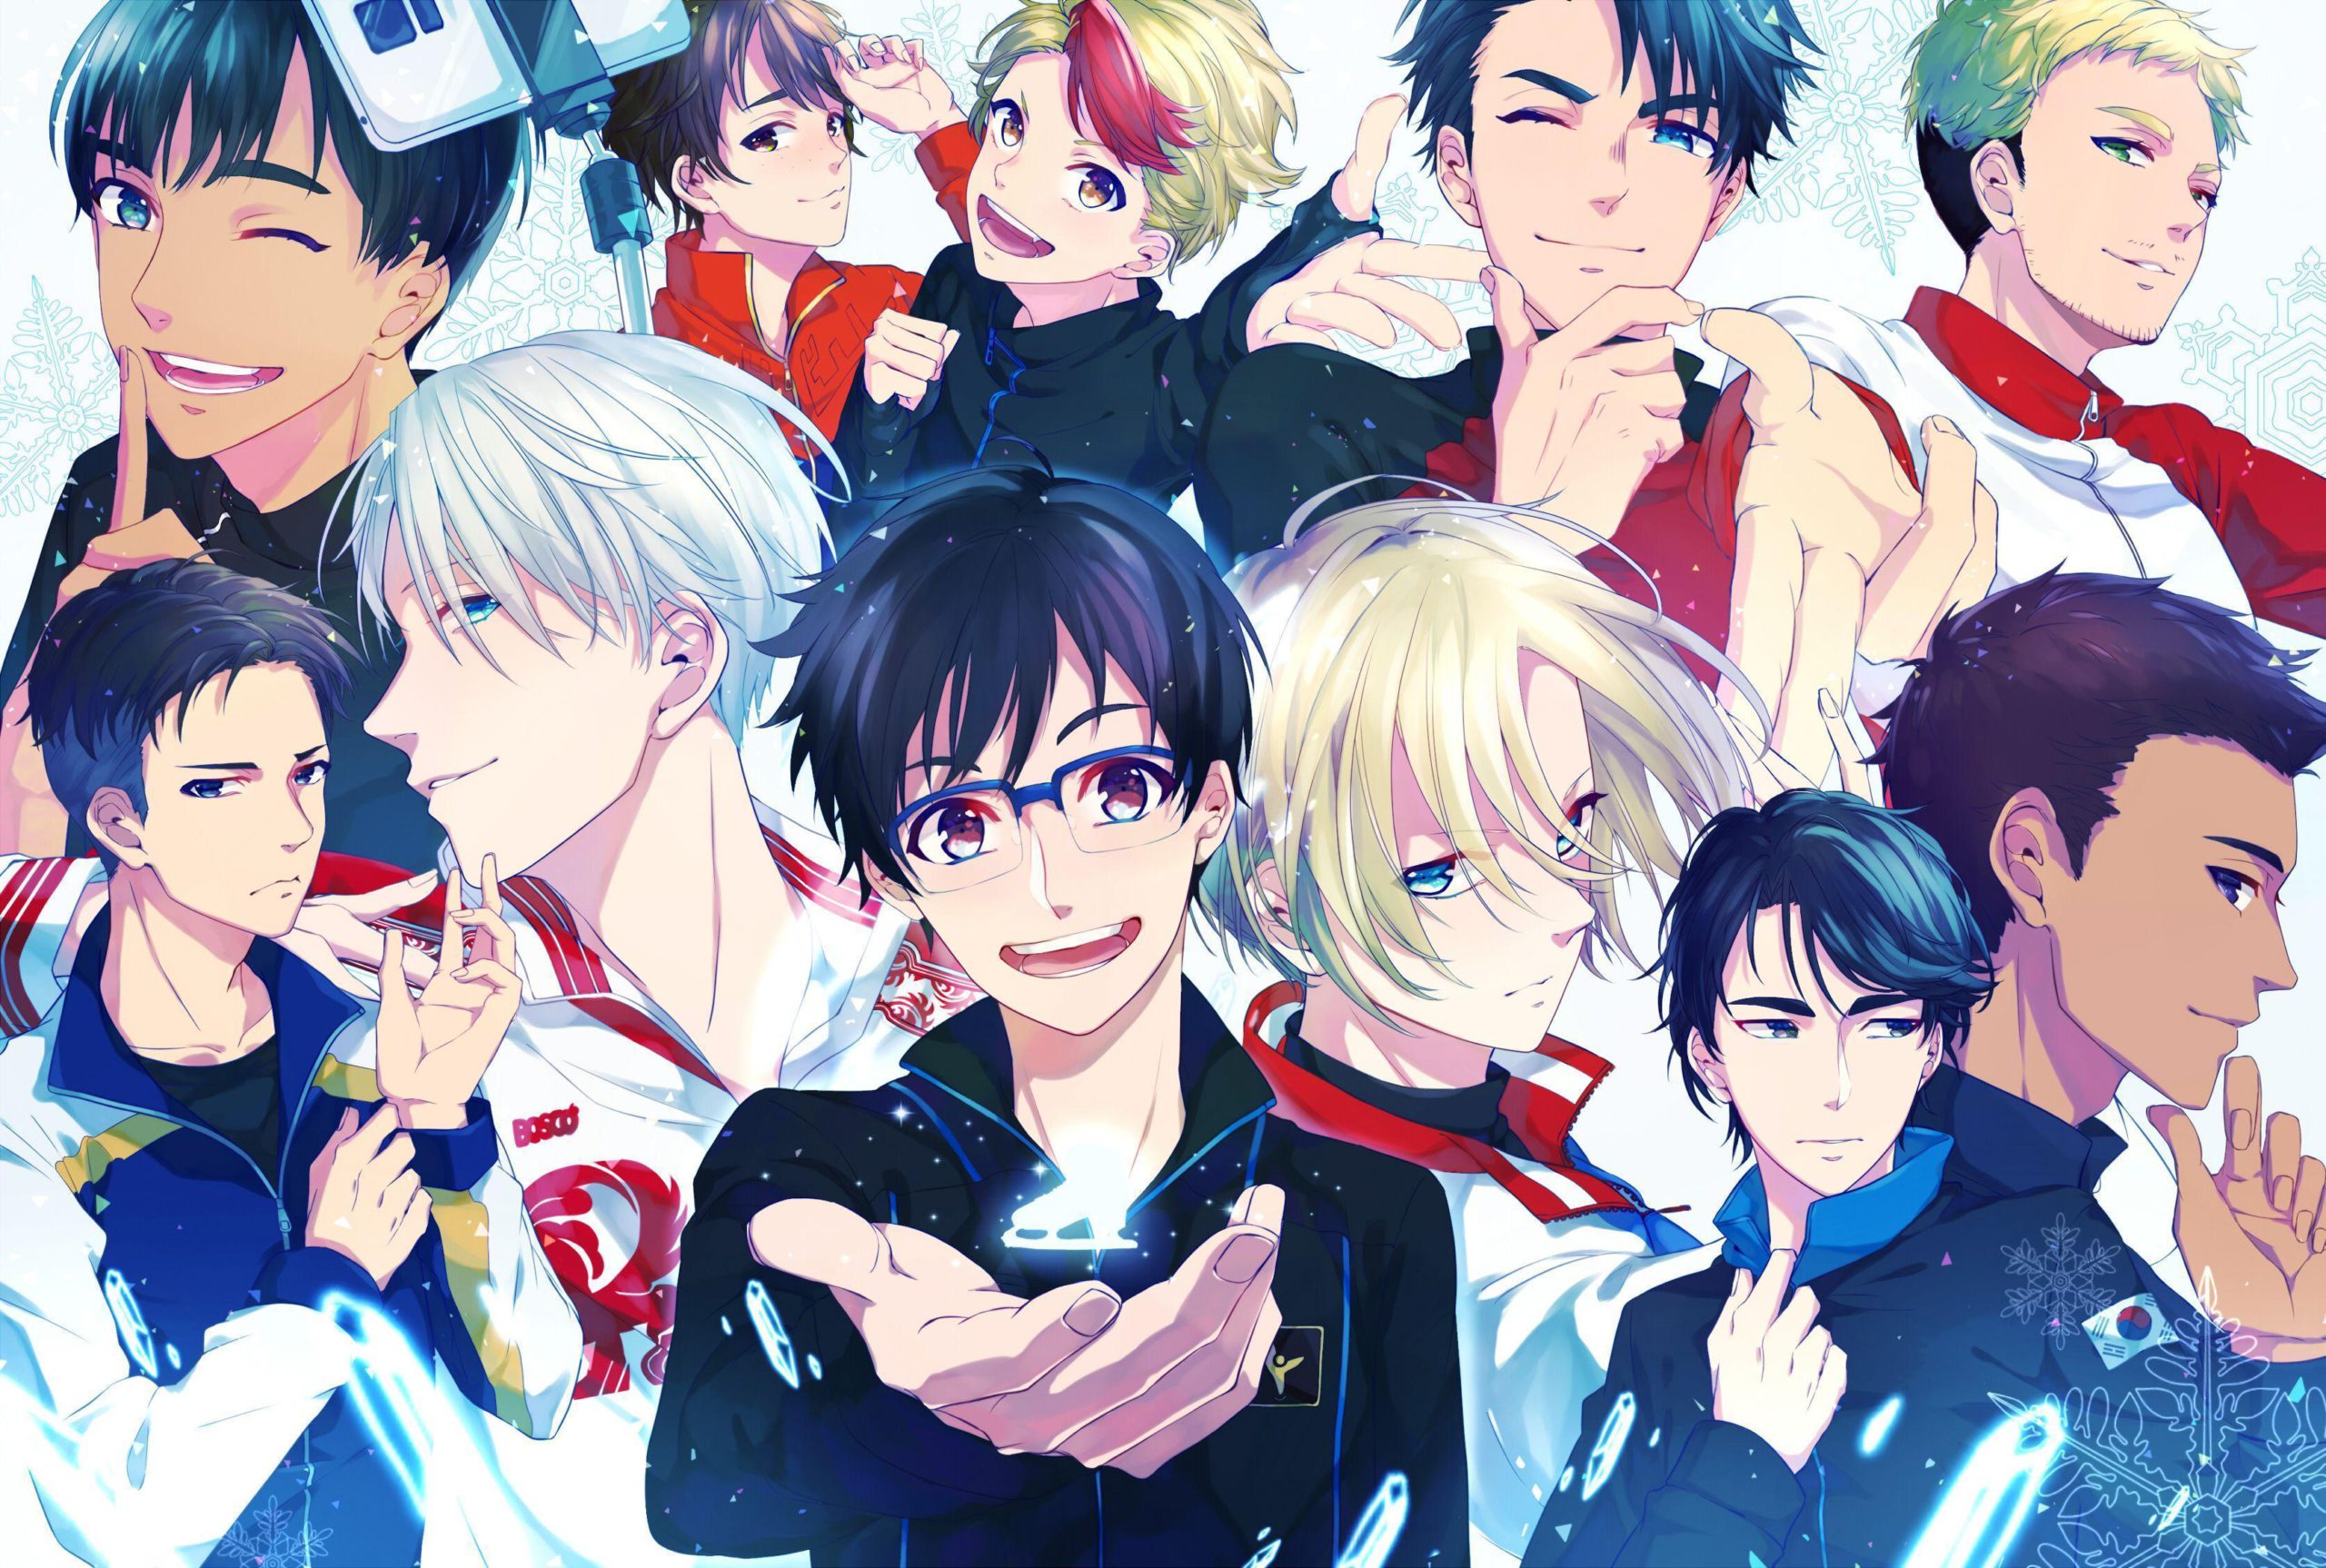 YURI ON ICE From Anime Series to MOVIE! Release Date, Trailer, and